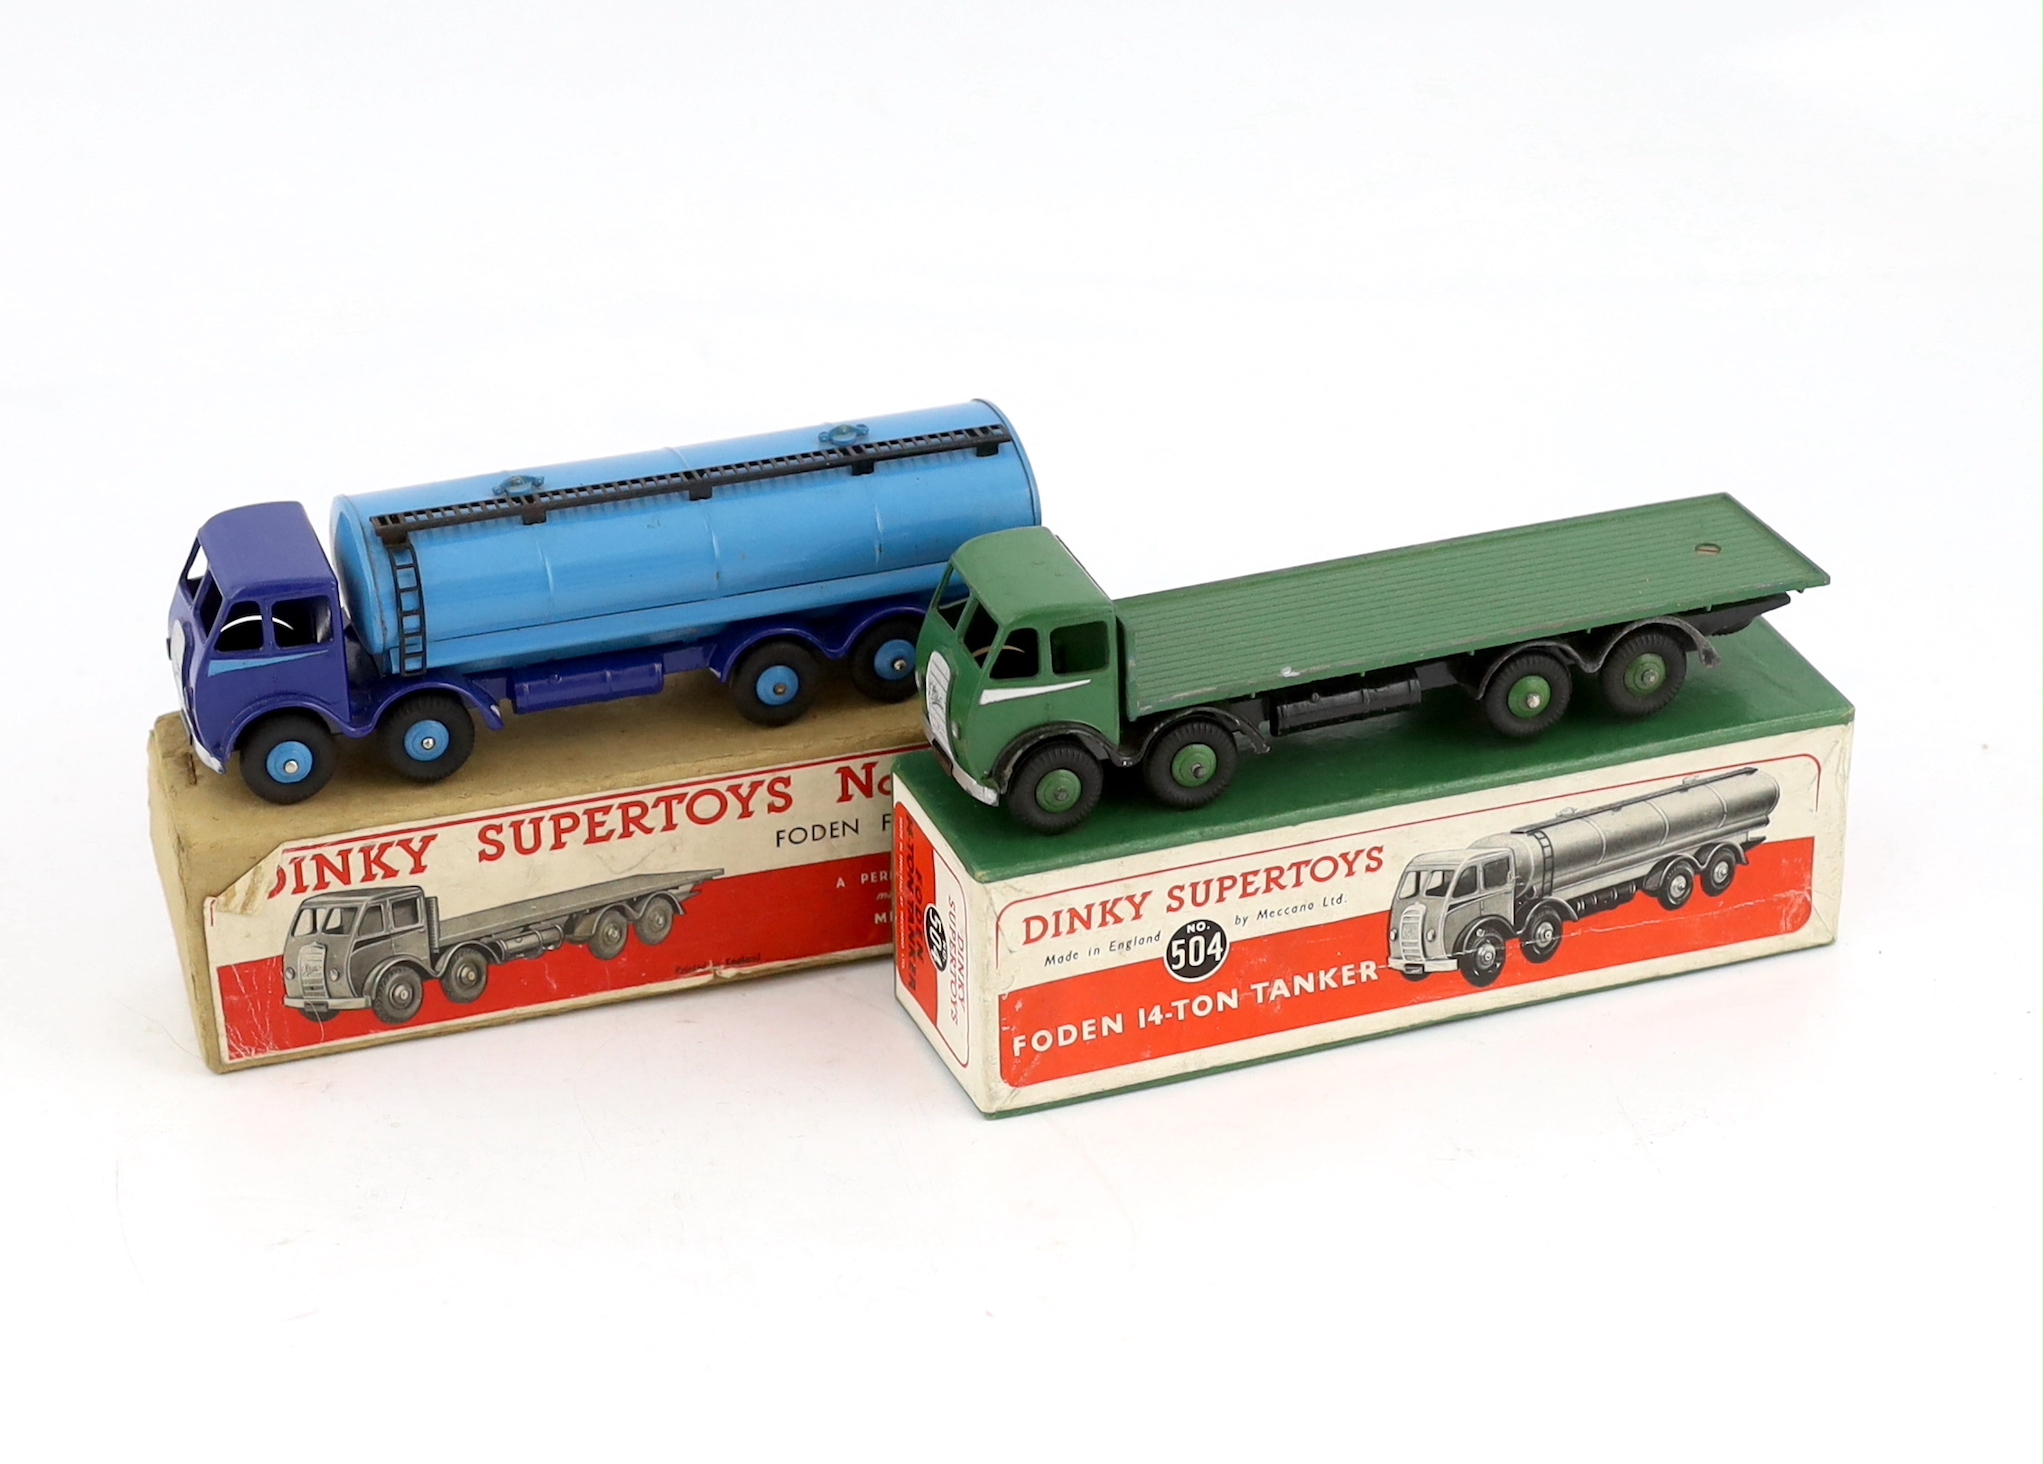 Two boxed Dinky Supertoys first type Fodens; a 14-ton tanker (504), with dark blue cab and - Image 3 of 4